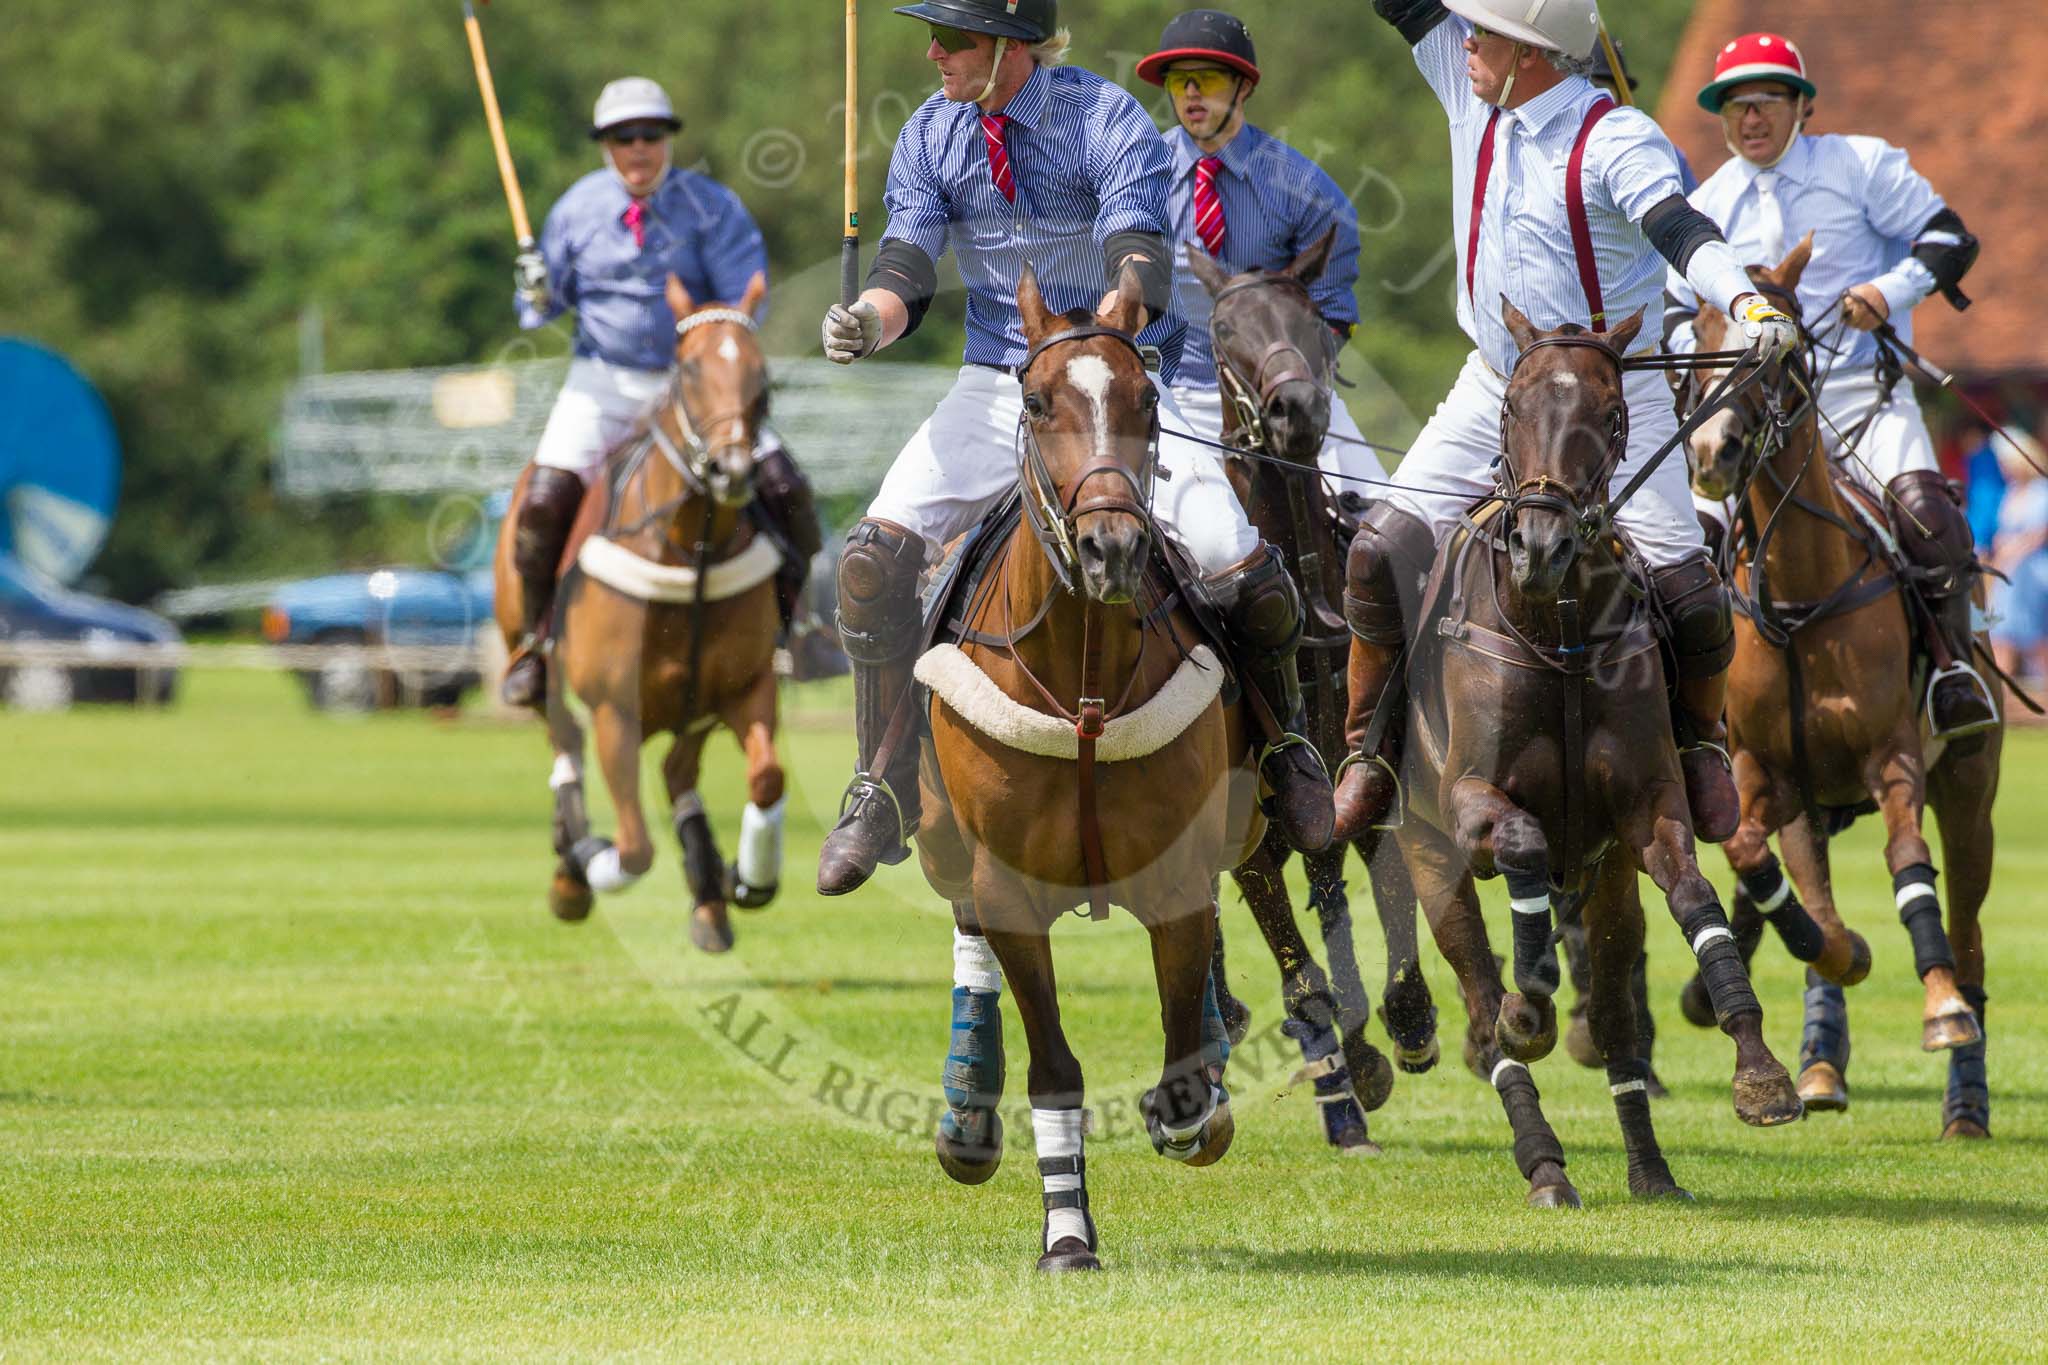 7th Heritage Polo Cup finals: Henry Fisher of Silver Fox USA Polo Team on the ball in the Final of the 7th HERITAGE POLO CUP 2012 v Mariano Darritchon of La Mariposa Argentina Polo Team (T.M.Lewin Official Shirt & Tie Supplier)..
Hurtwood Park Polo Club,
Ewhurst Green,
Surrey,
United Kingdom,
on 05 August 2012 at 13:25, image #25